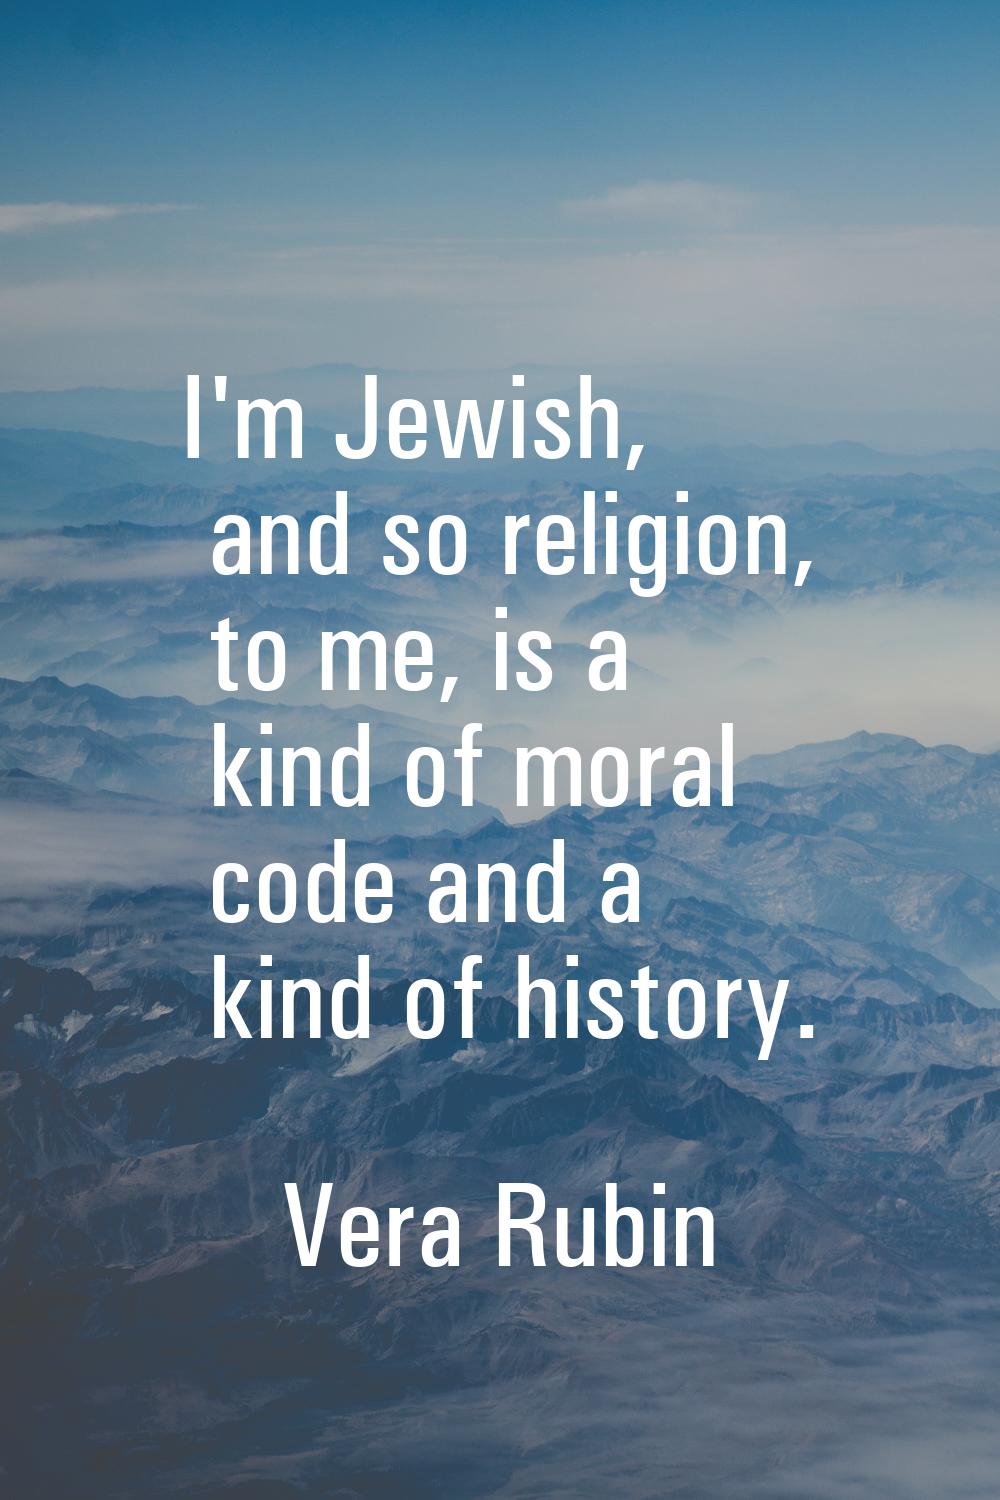 I'm Jewish, and so religion, to me, is a kind of moral code and a kind of history.